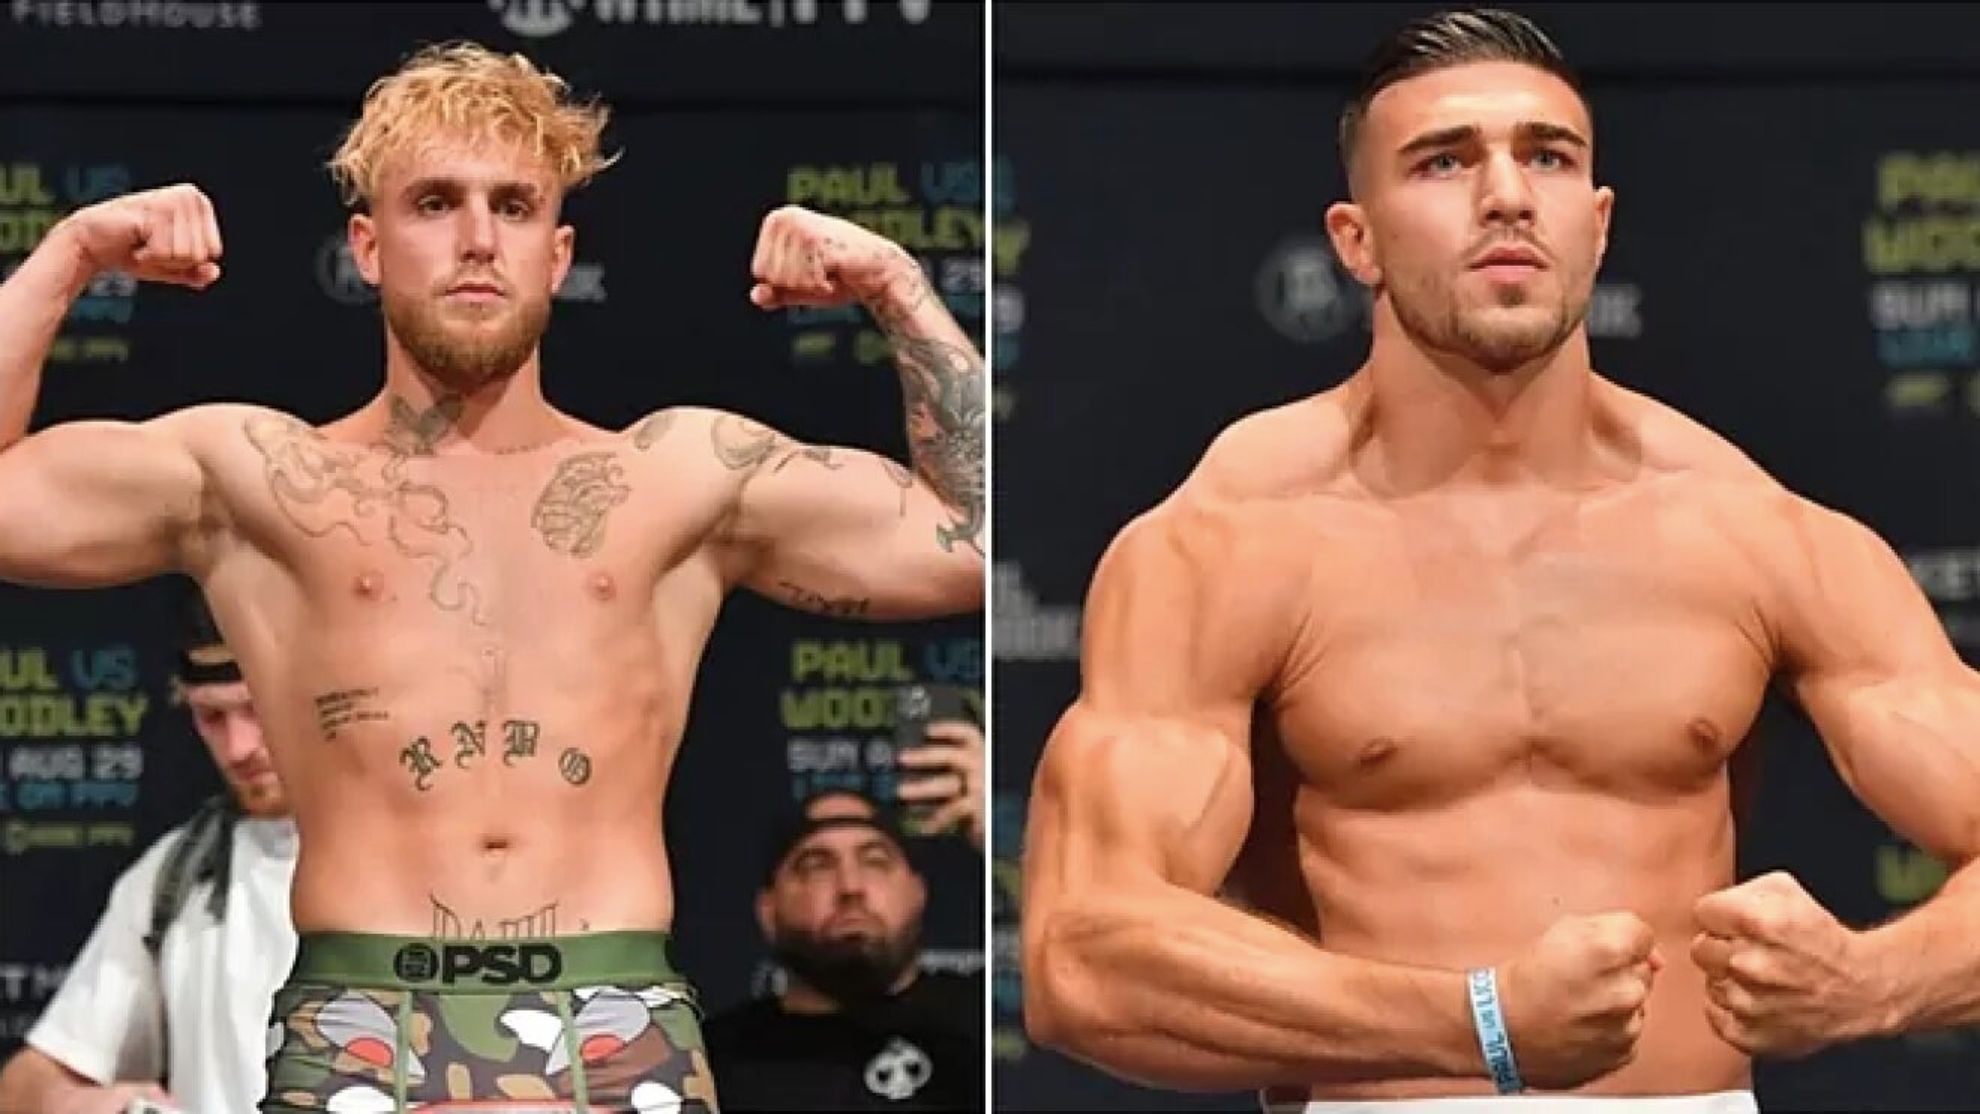 Jake Paul and Tommy Fury to fight on February 26 in Saudi Arabia